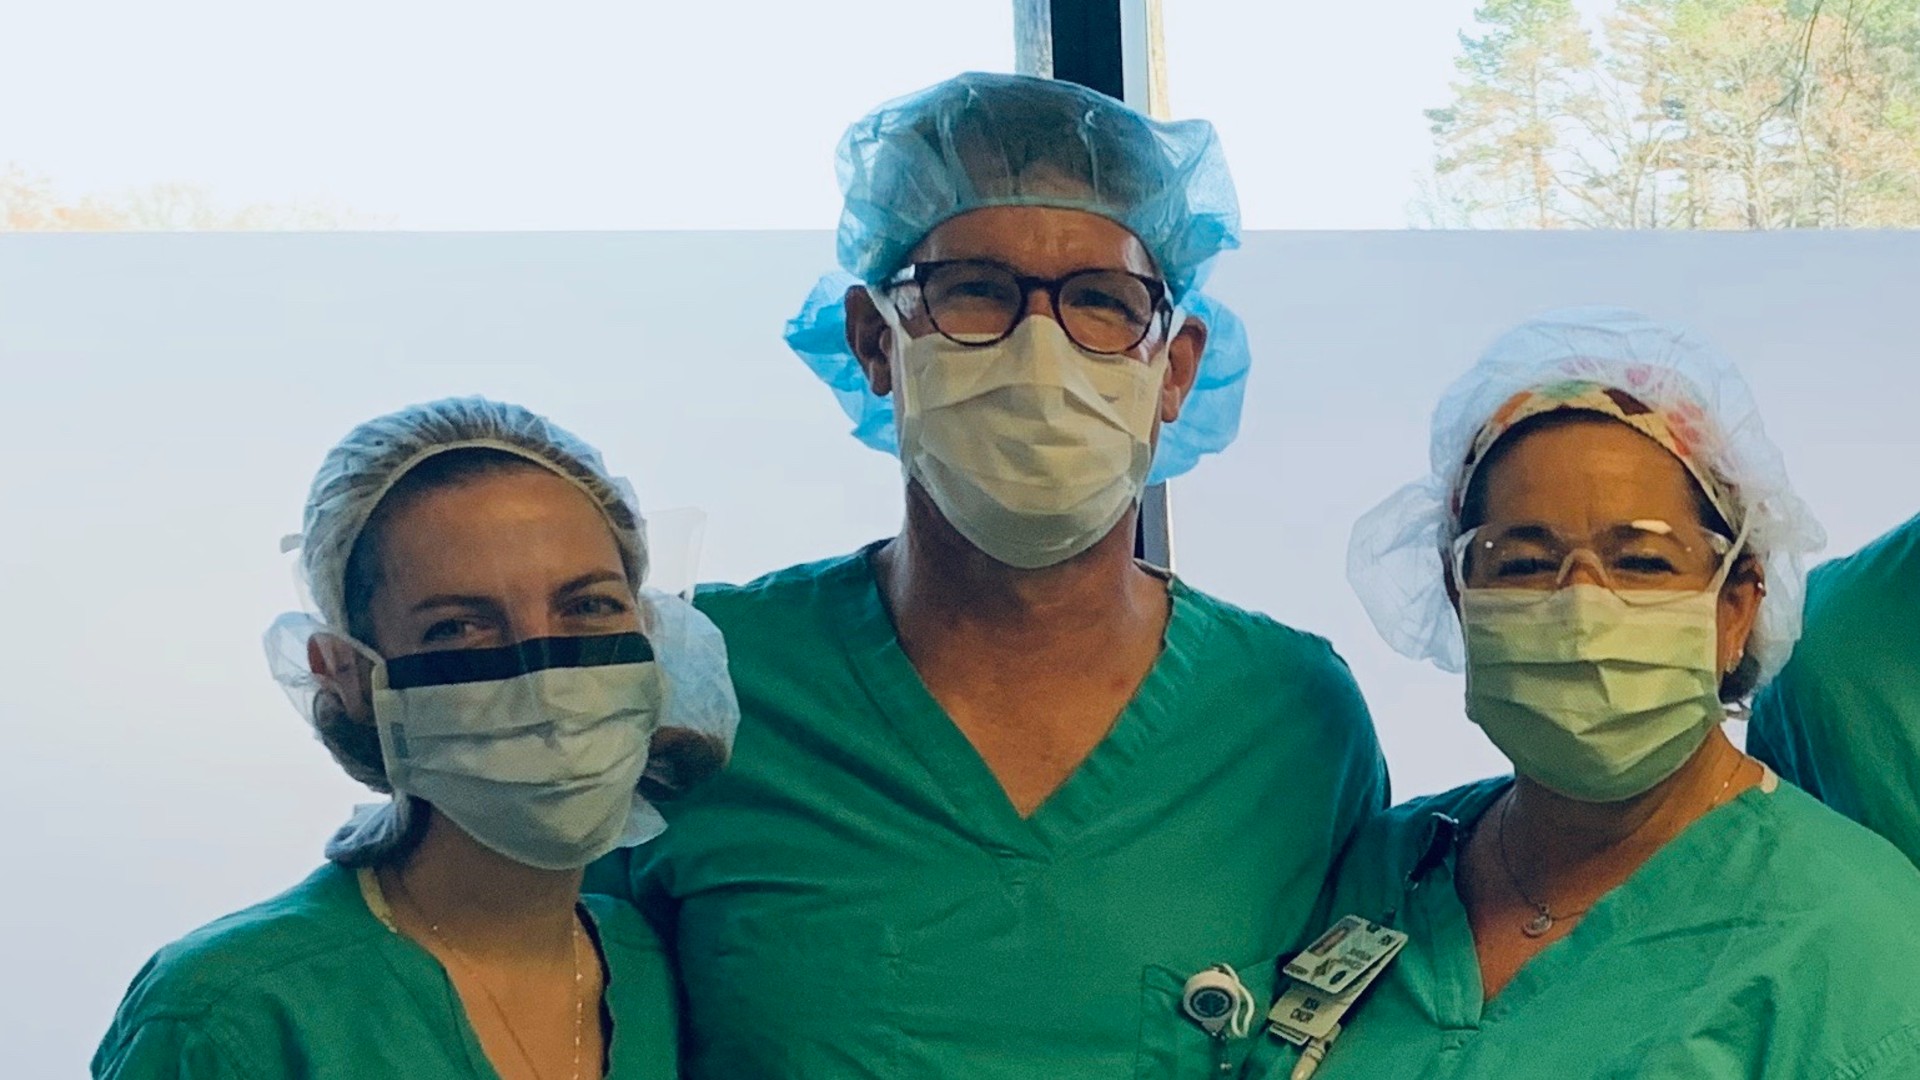 Atrium Health is the first hospital system in the Carolinas to offer a new type of hysterectomy that offers patients the advantages of both vaginal and laparoscopic hysterectomies: vNOTES, Vaginal Natural Orifice Translumenal Endoscopic Surgery.